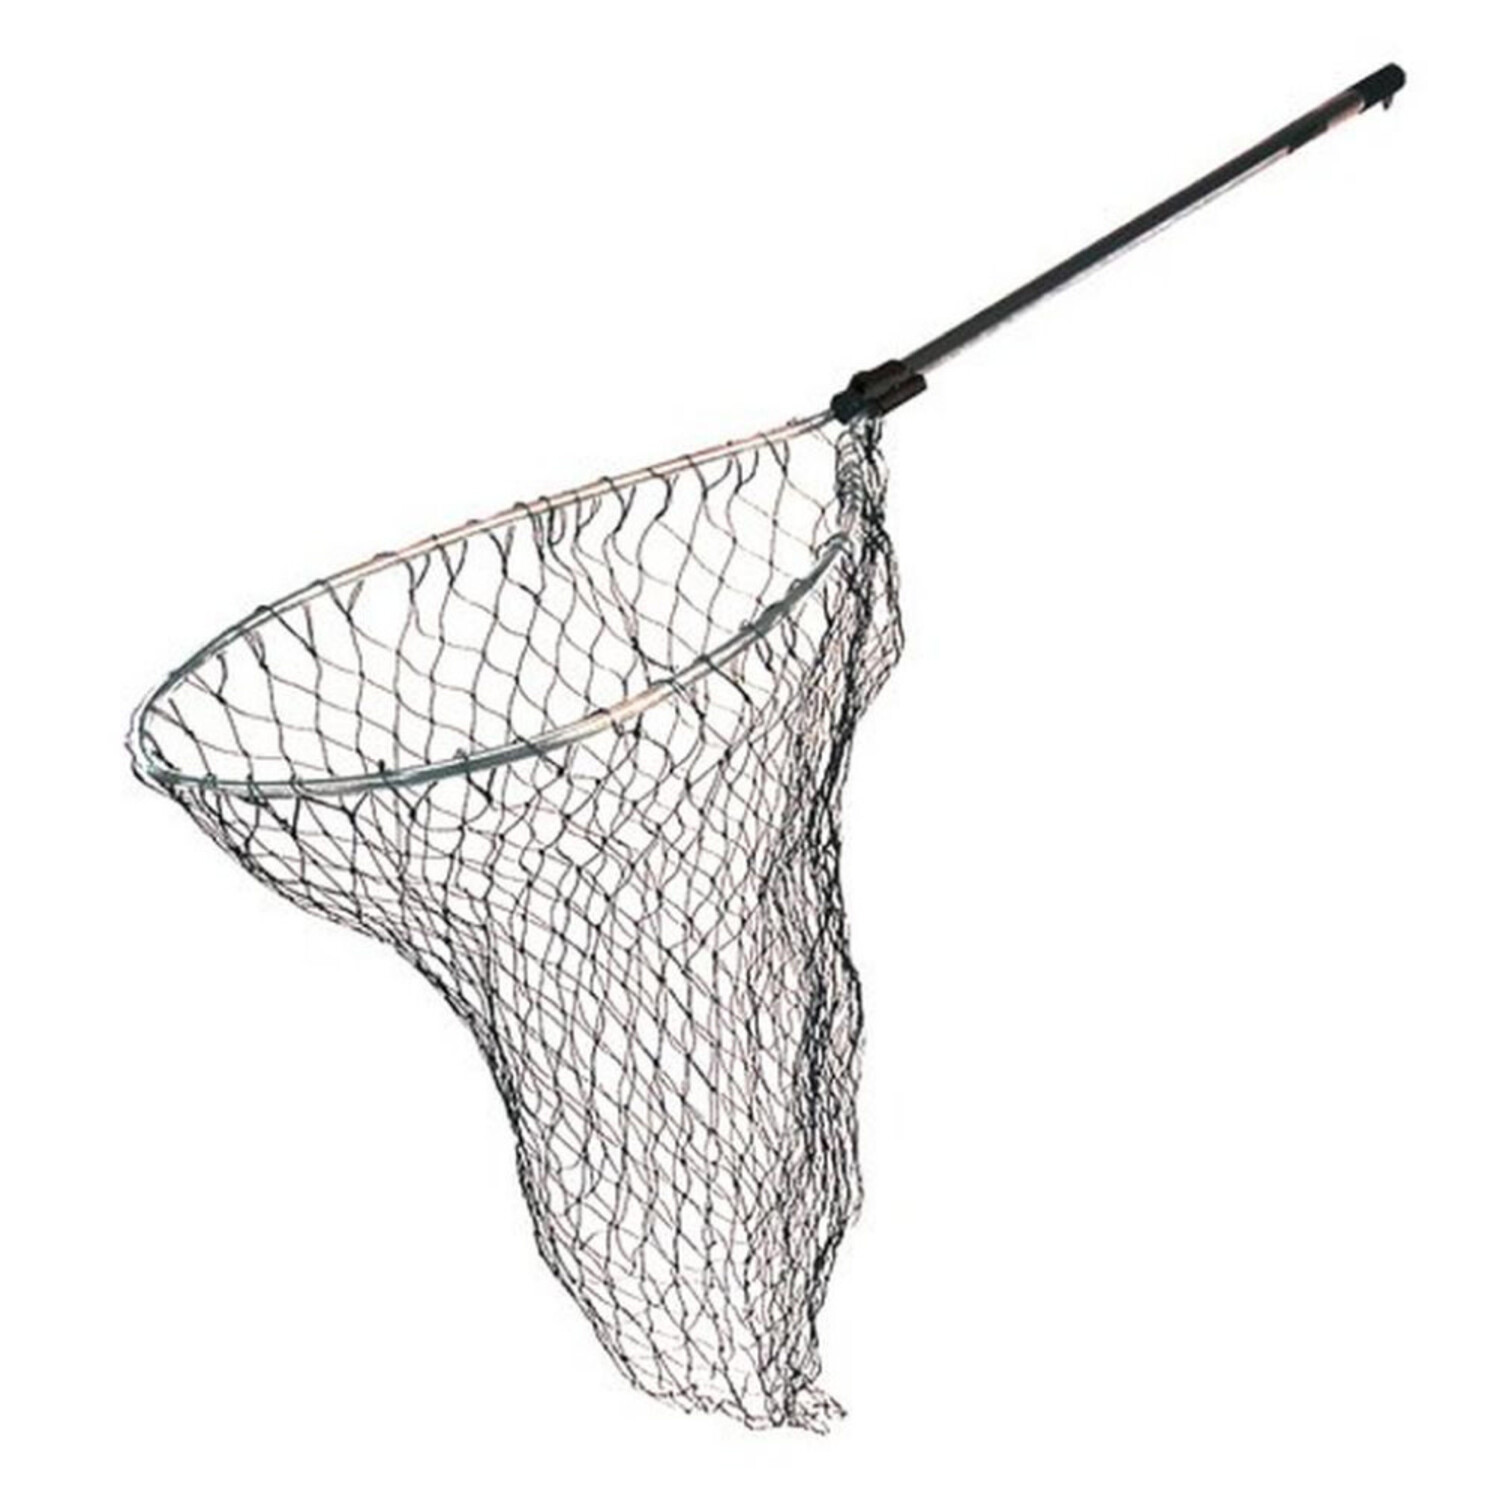 FRABILL POWER CATCH Net 26 x 30 w/Telescoping Extension Handle up to 90  $25.50 - PicClick